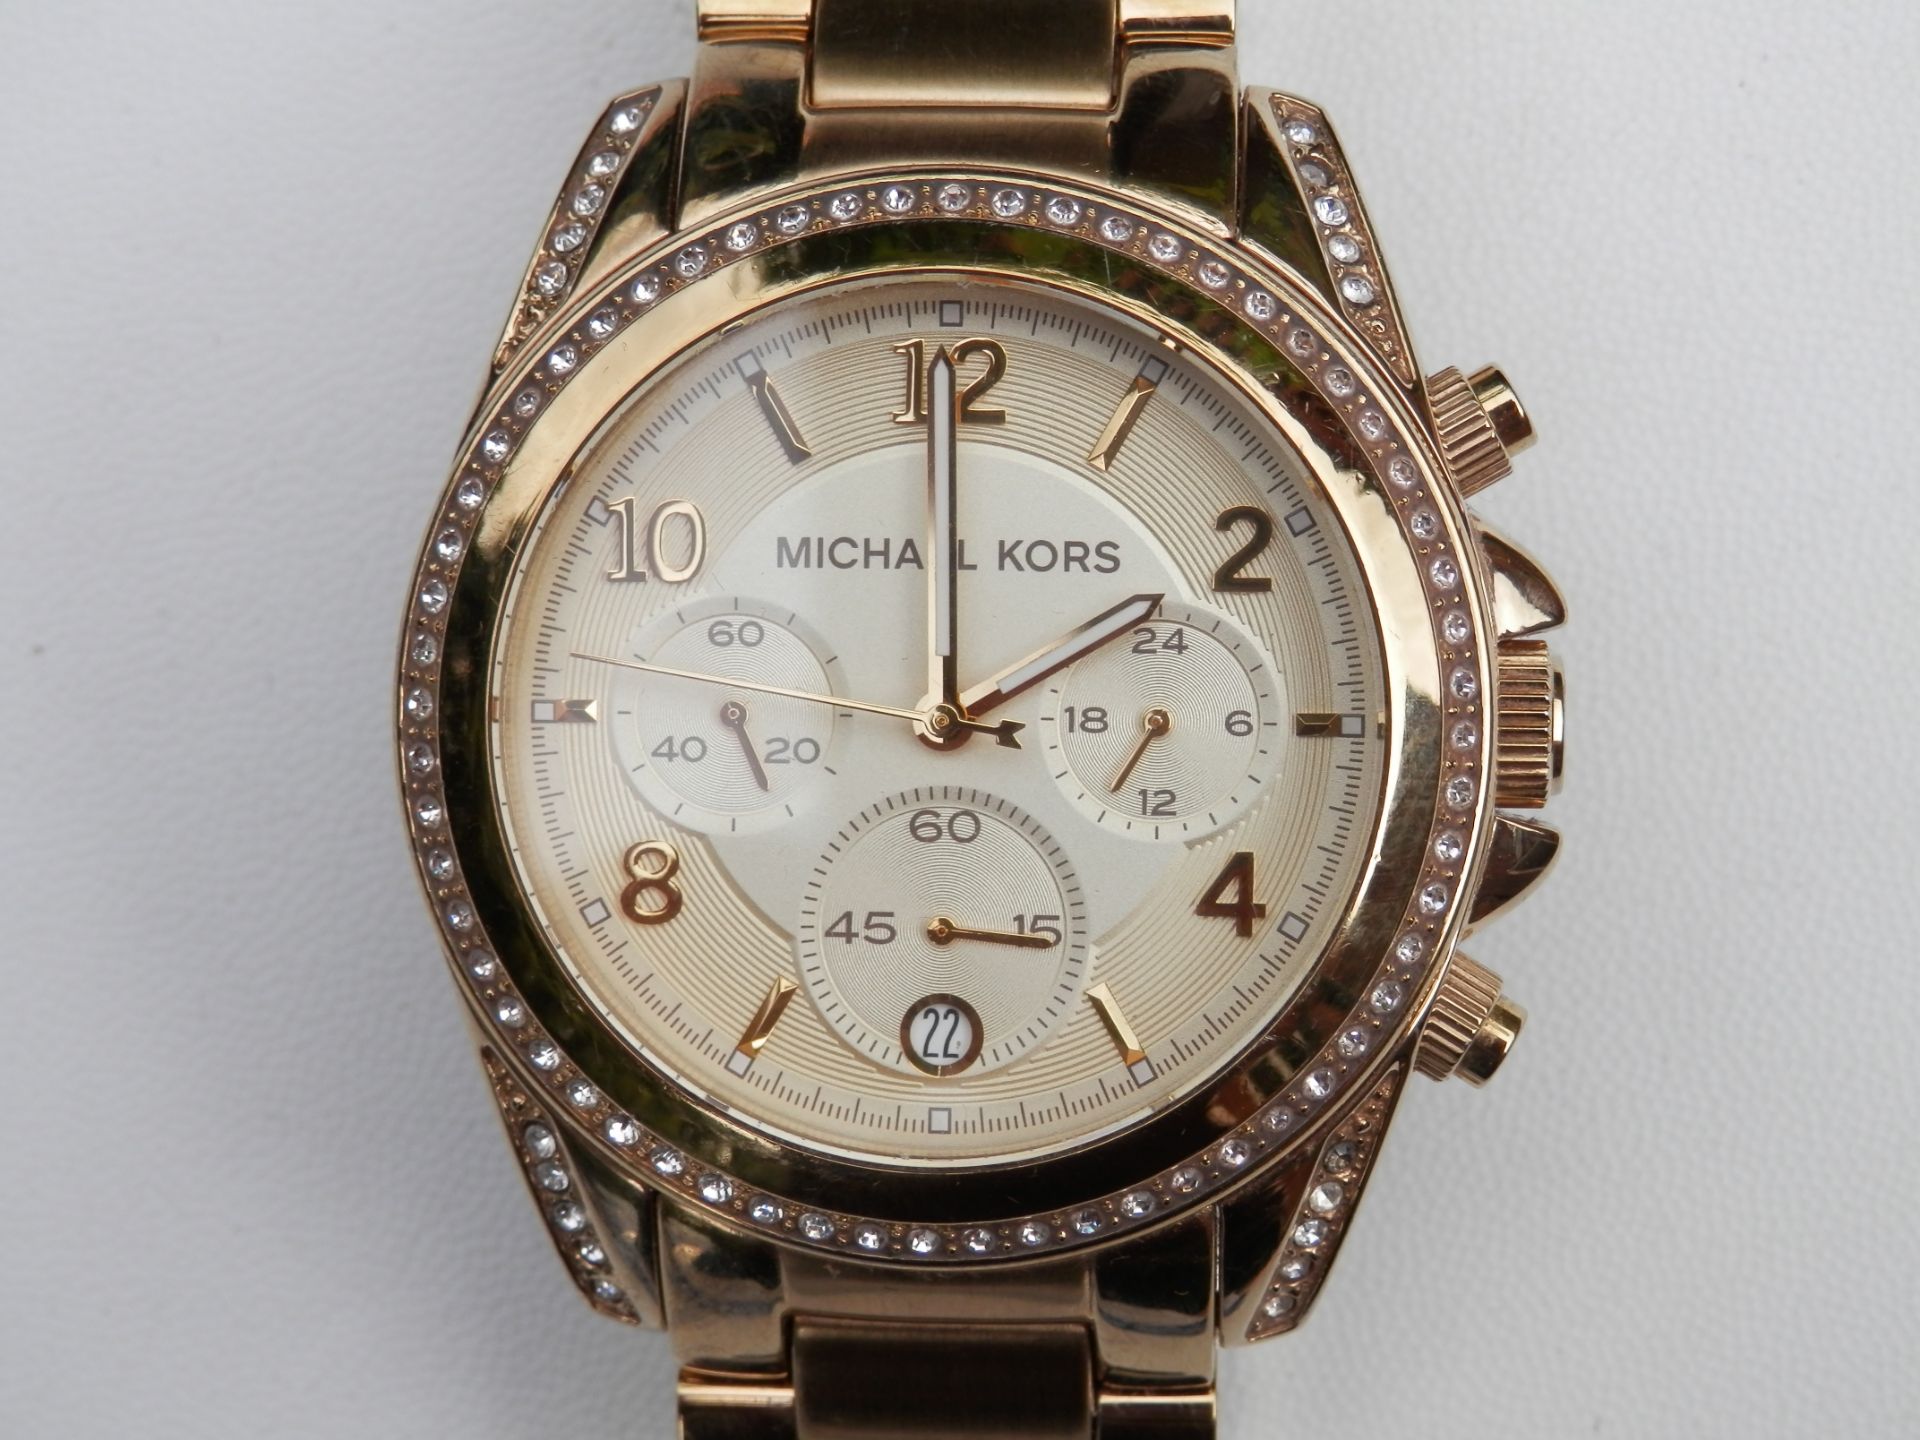 RRP £240. SUPERB LADIES MICHAEL KORS FULL STAINLESS GOLD PLATED DIAMANTE ENCRUSTED CHRONO DATE WATCH